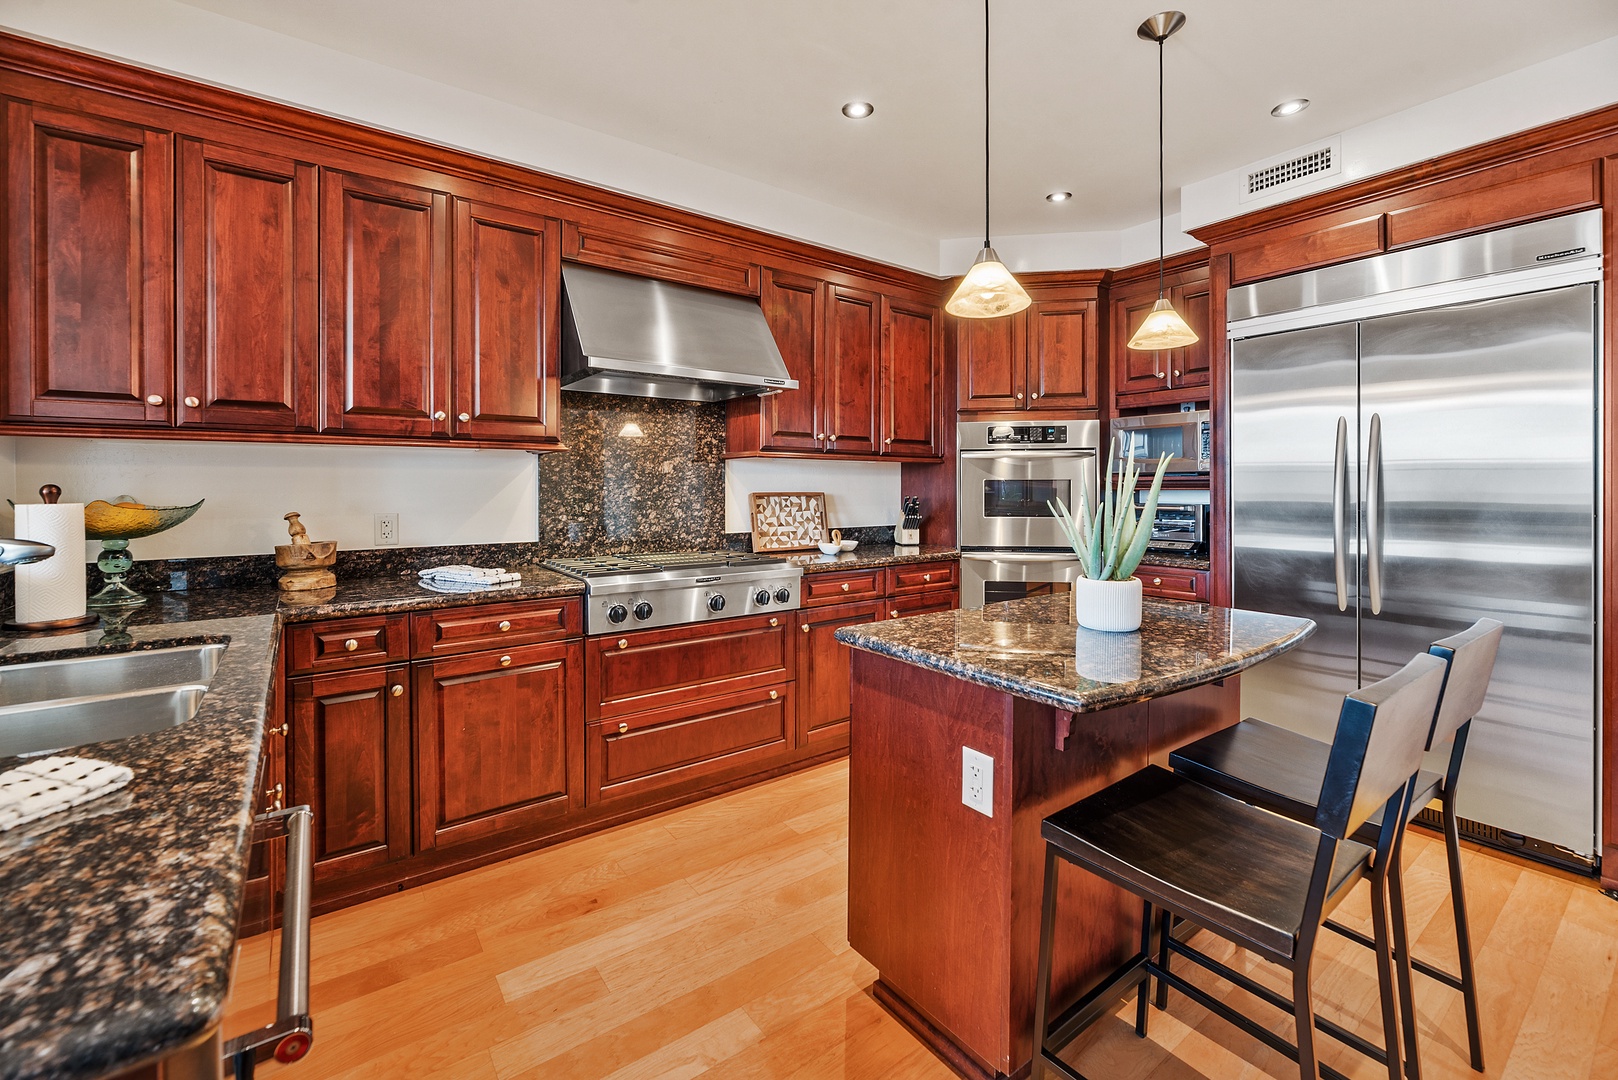 La Jolla Vacation Rentals, Montefaro in the Village of La Jolla - This kitchen has everything you might need during your long stay